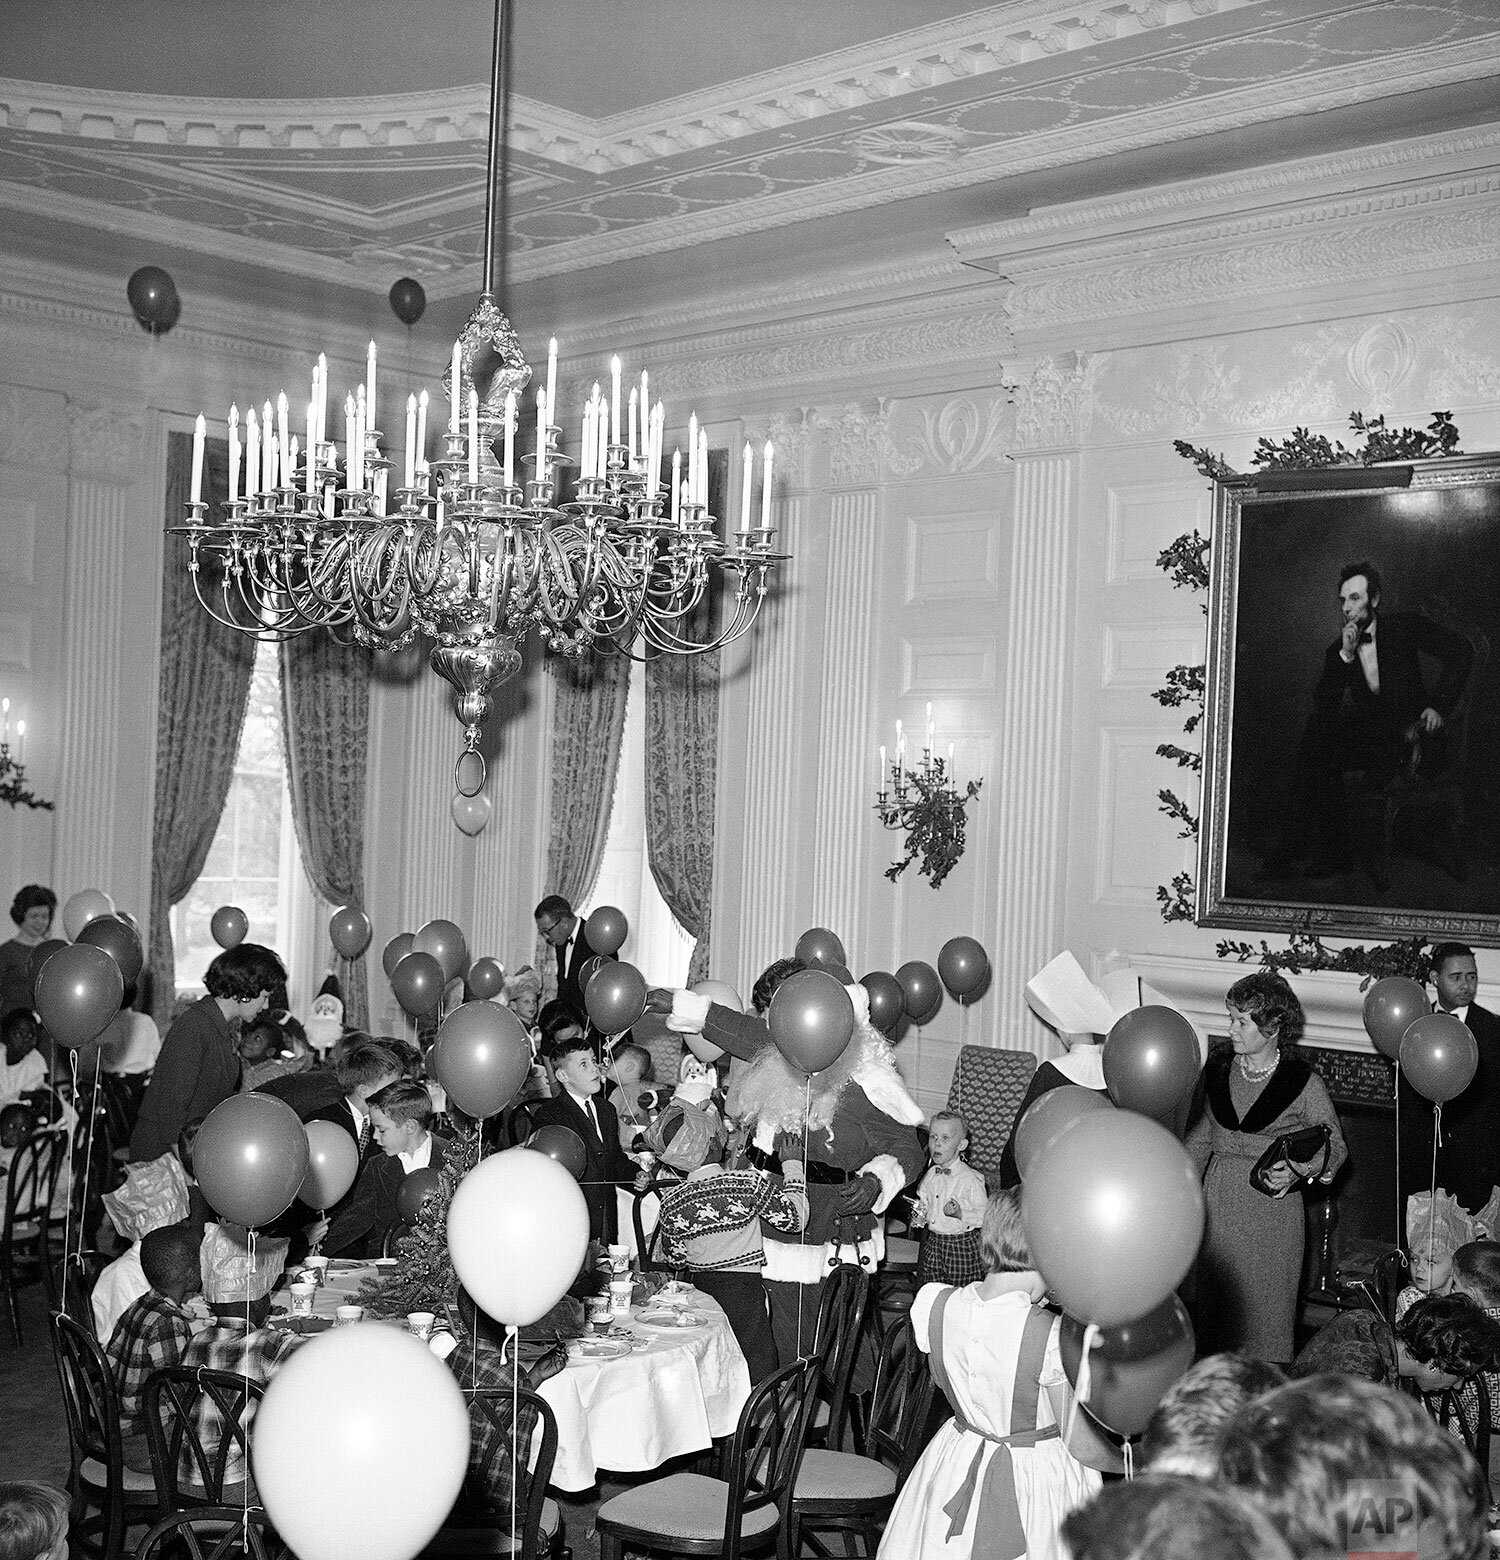  The State Dining Room where the White House holds its formal dinner parties, was jammed with balloon-holding youngsters at a Christmas party for orphans, Dec. 22, 1961.  (AP Photo/Bob Schutz) 